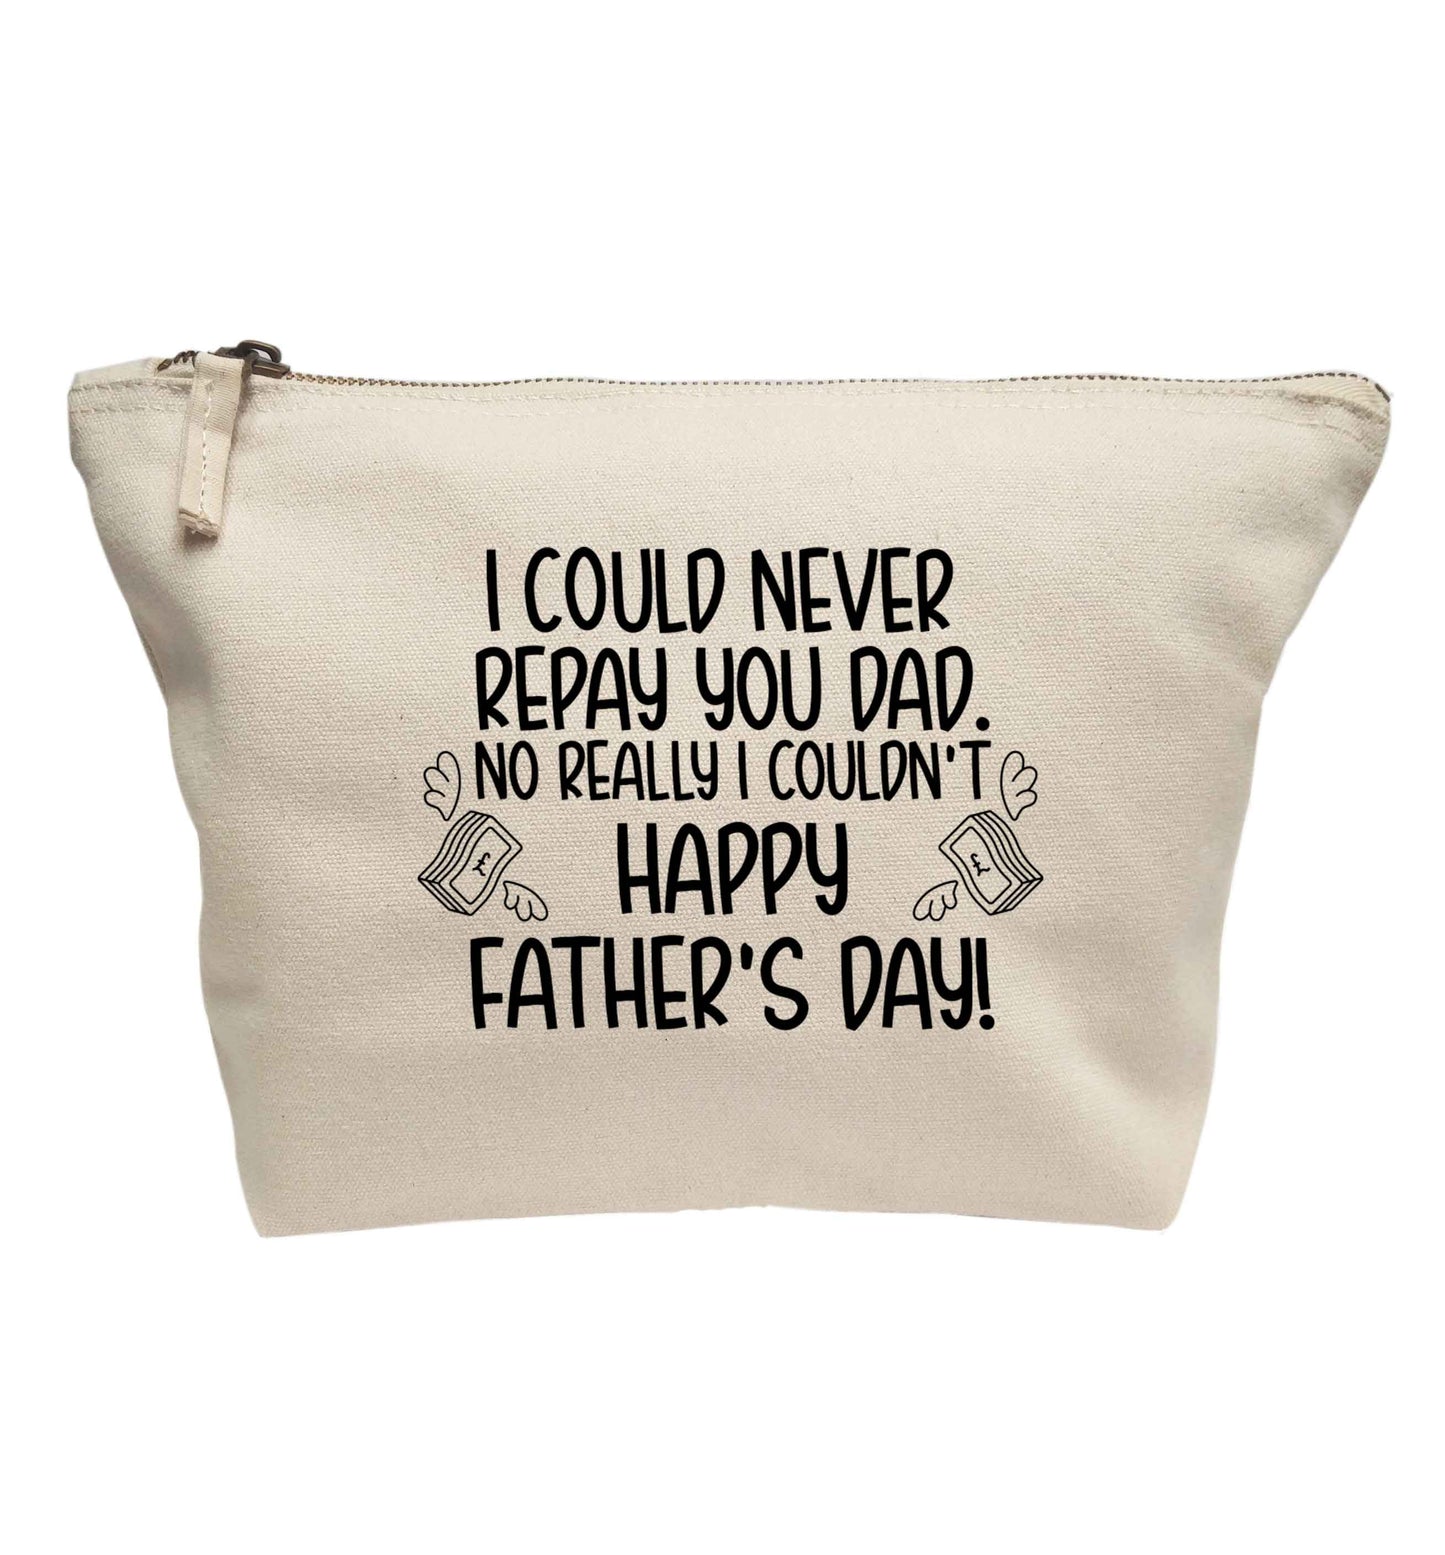 I could never repay you dad. No I really couldn't happy Father's day! | Makeup / wash bag